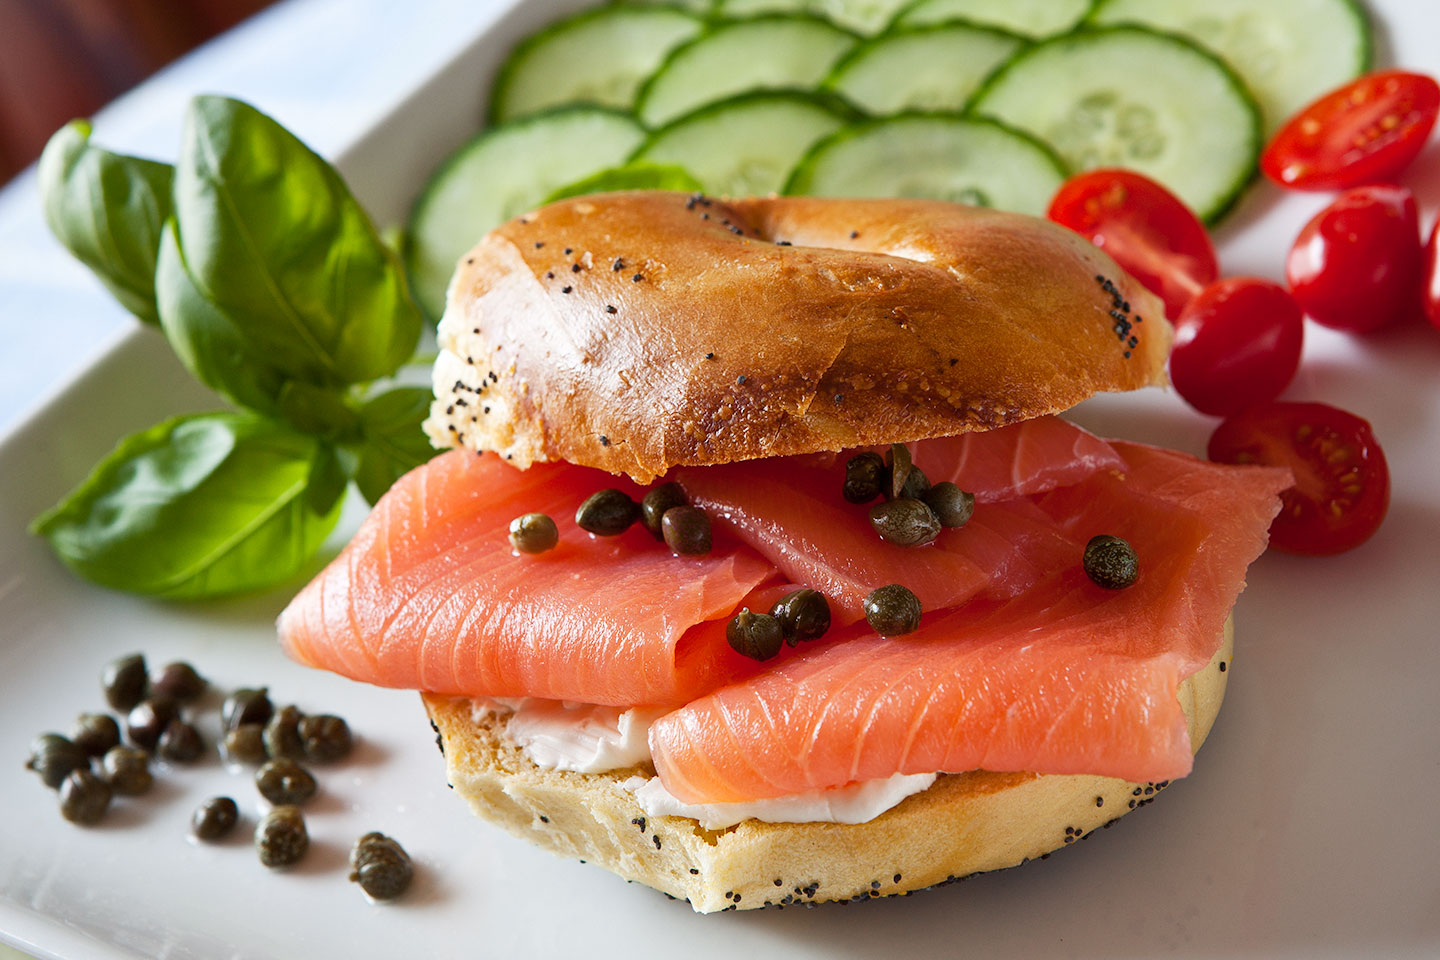 Lox, Bagels and Pickles, oh my!